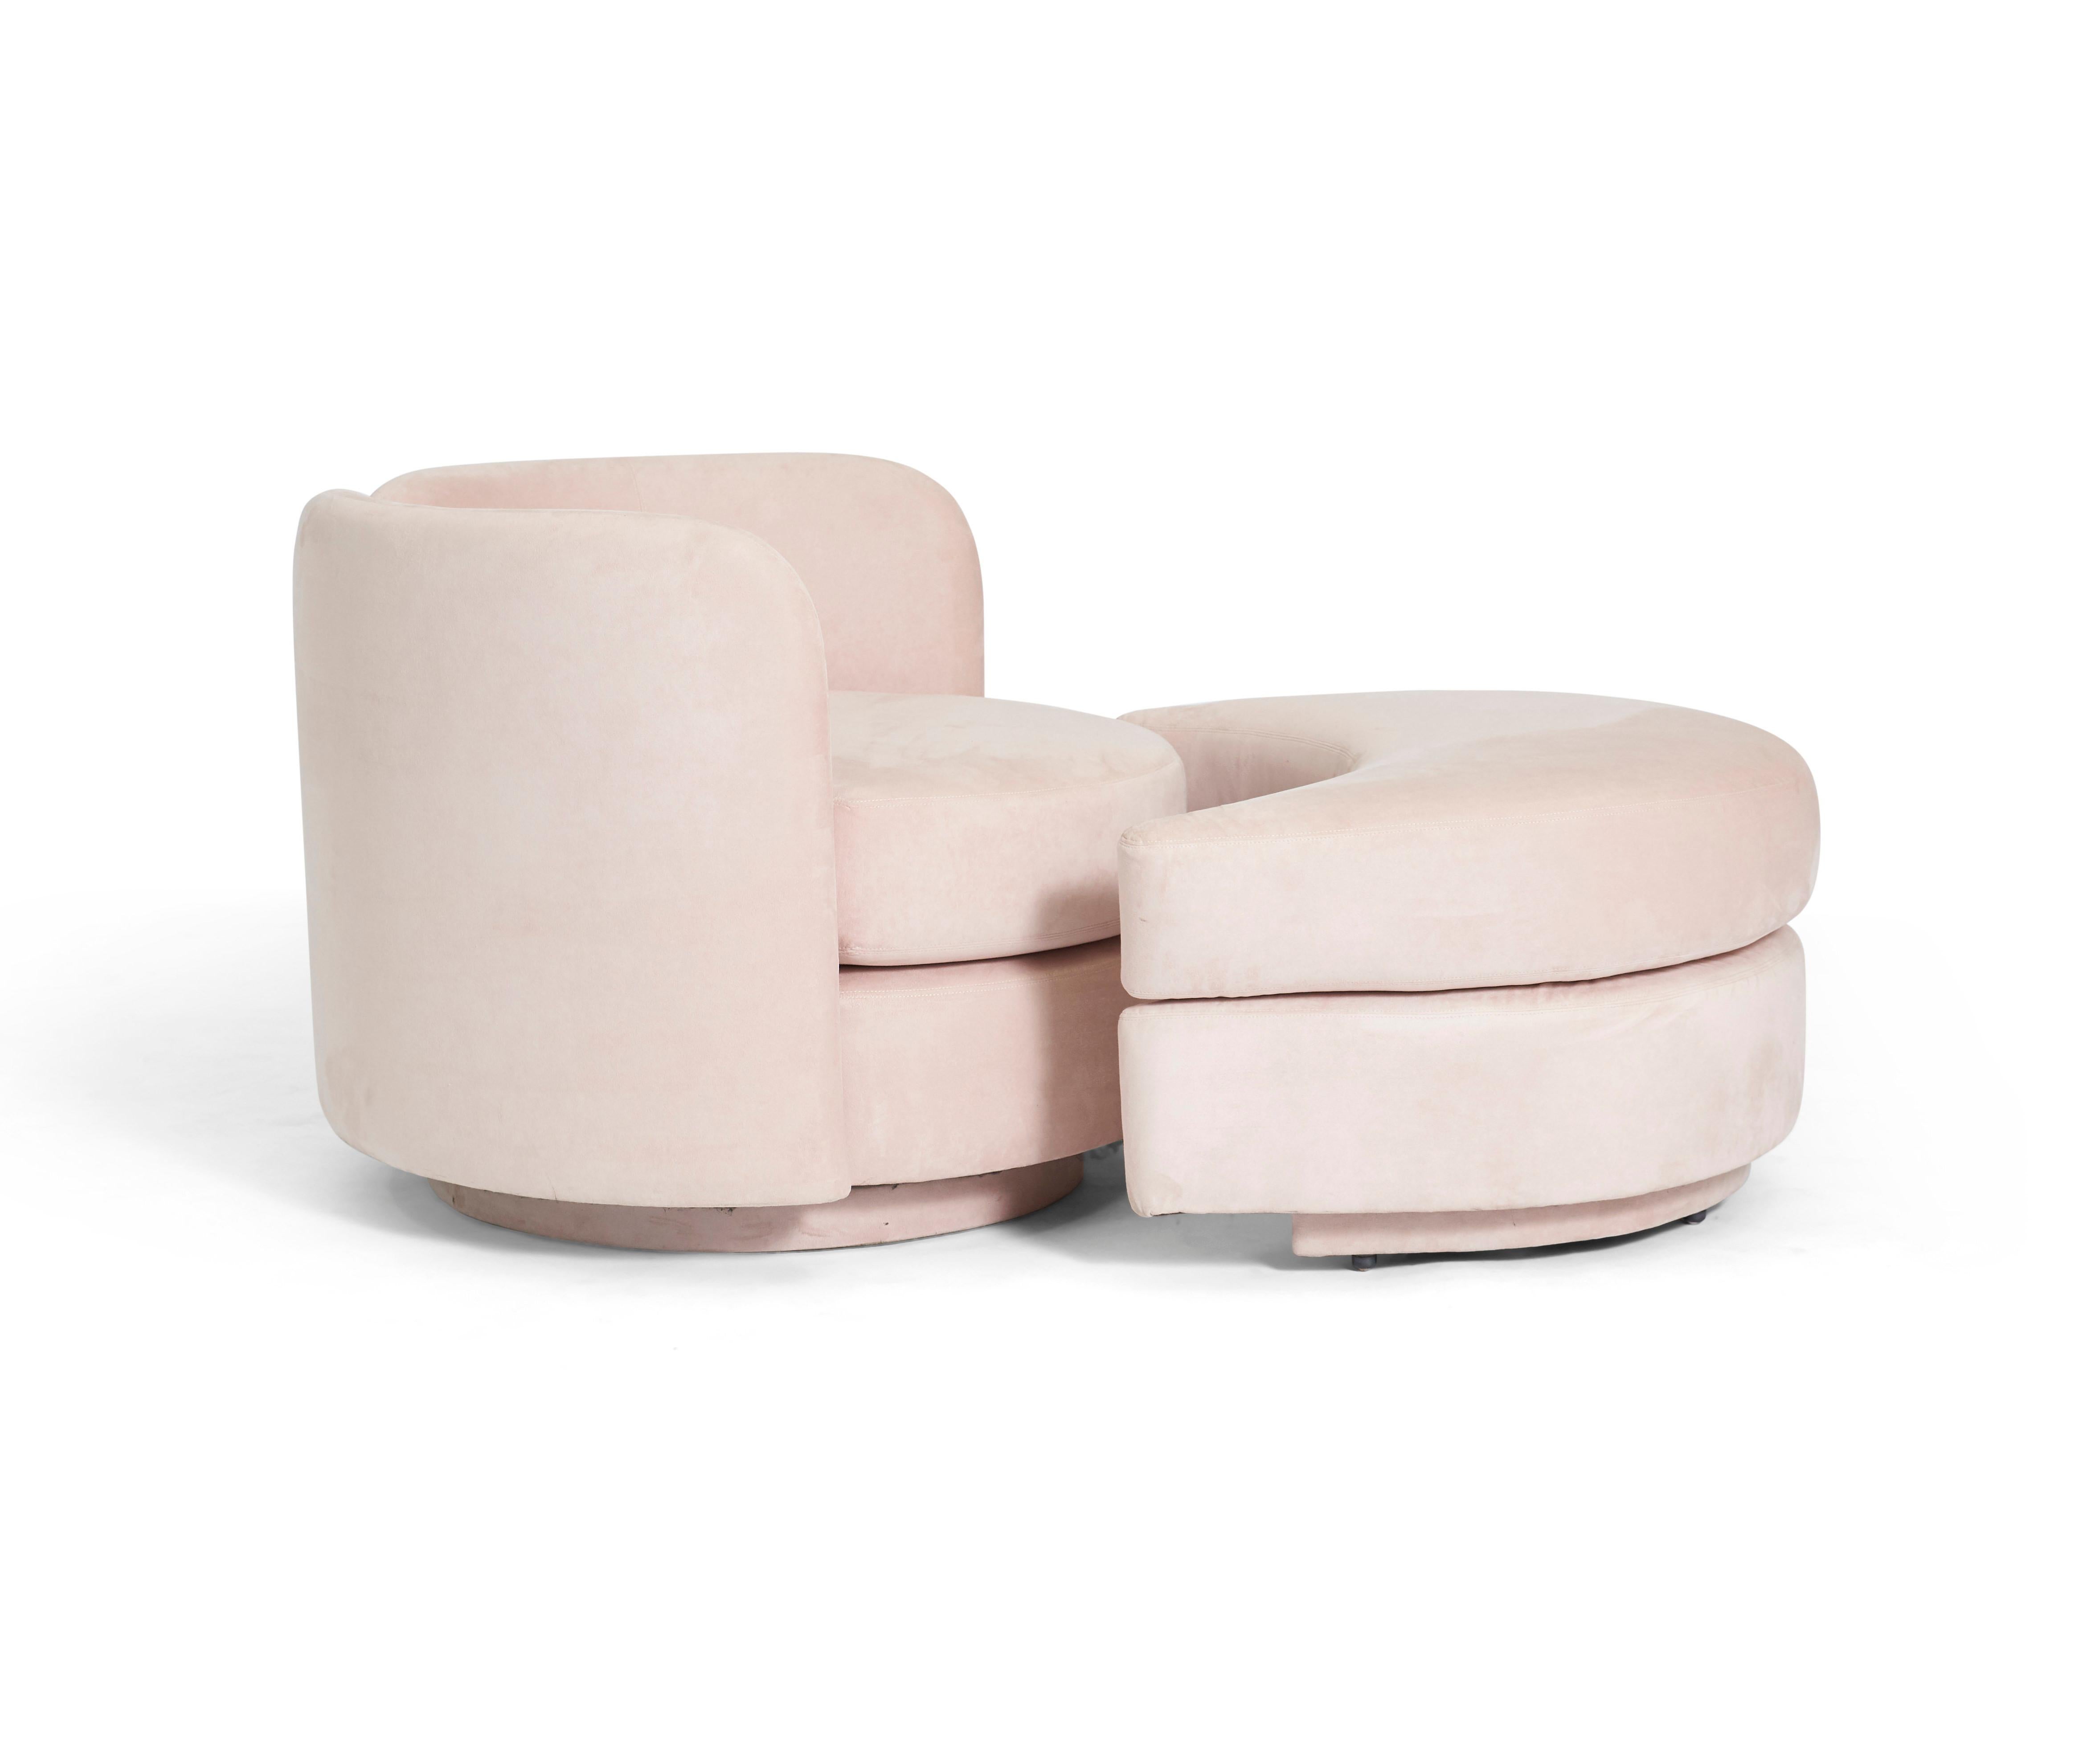 Large scale swivel chair with split back and rolling ottoman. Original pink ultra suede fabric. Postmodern Design attributed to Milo Baughman.